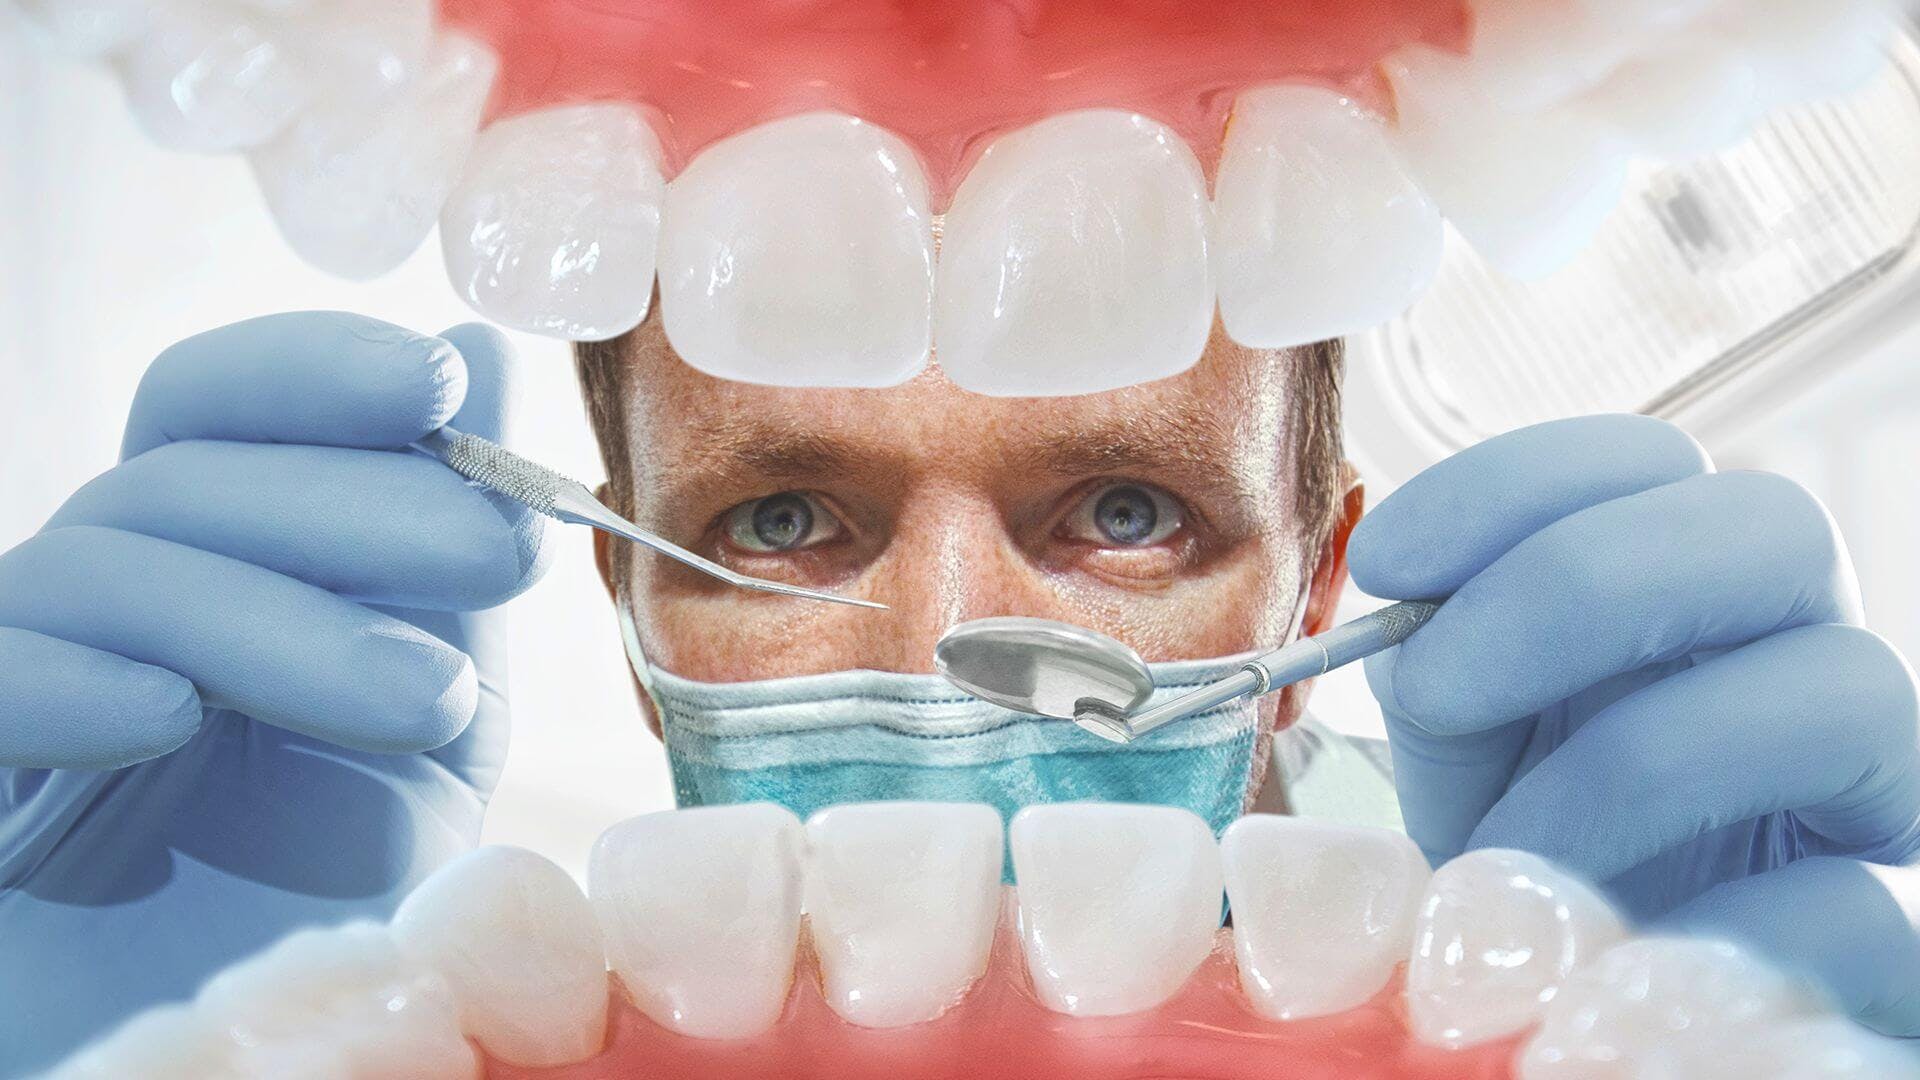 Dentist Things To Look For When Finding The Right Dentist